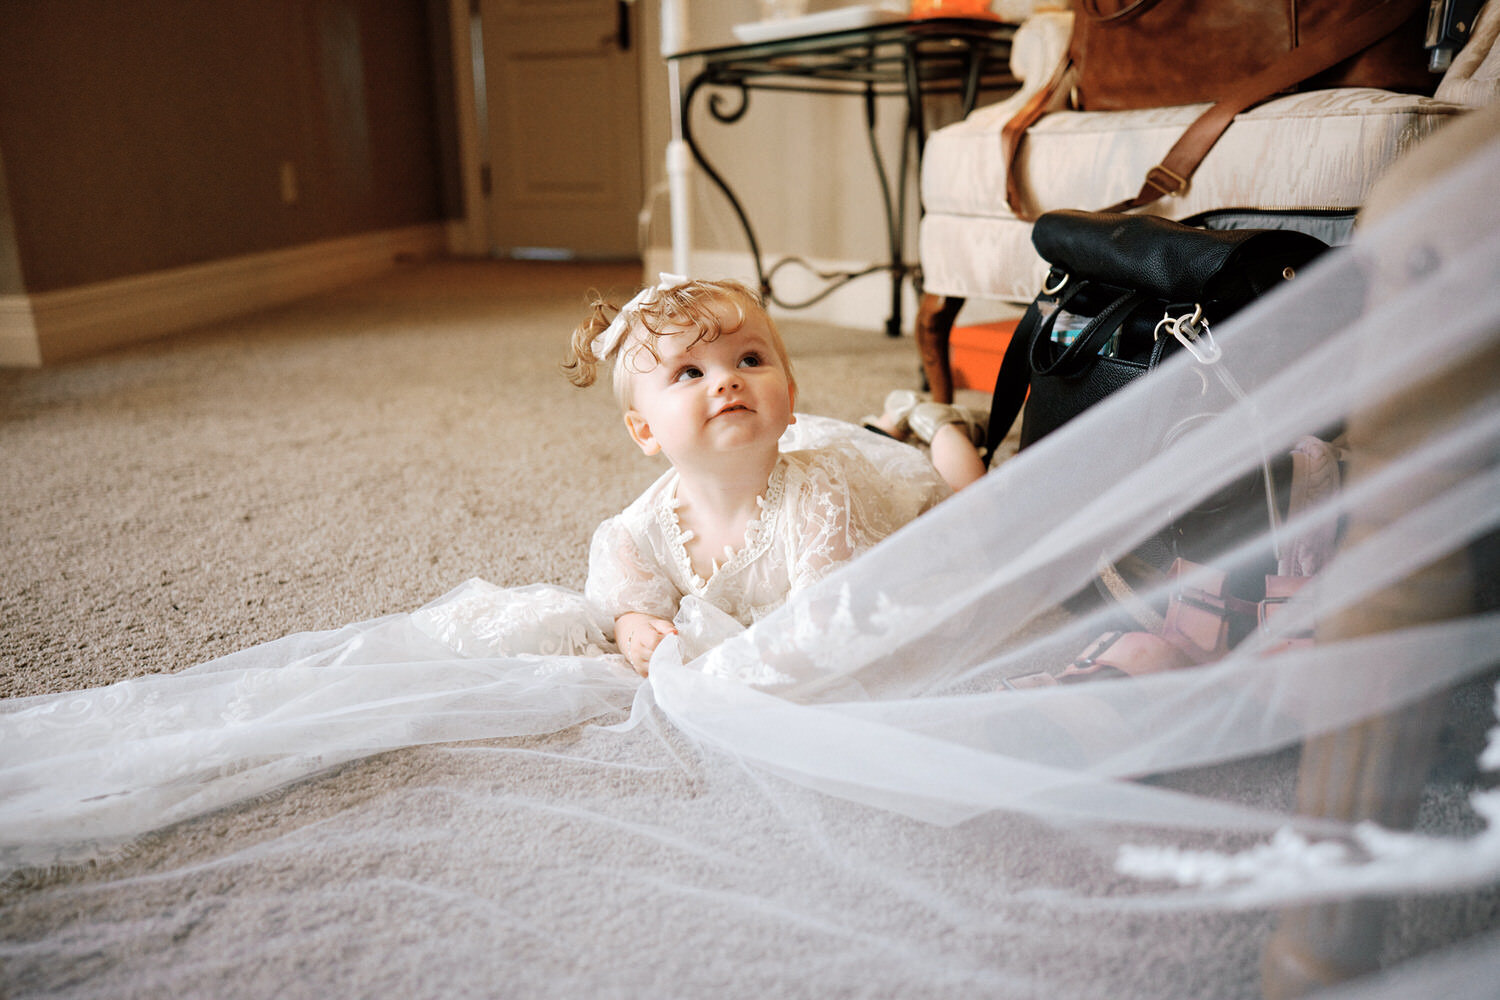 Baby grabs onto the bridal veil and looks up at the bride